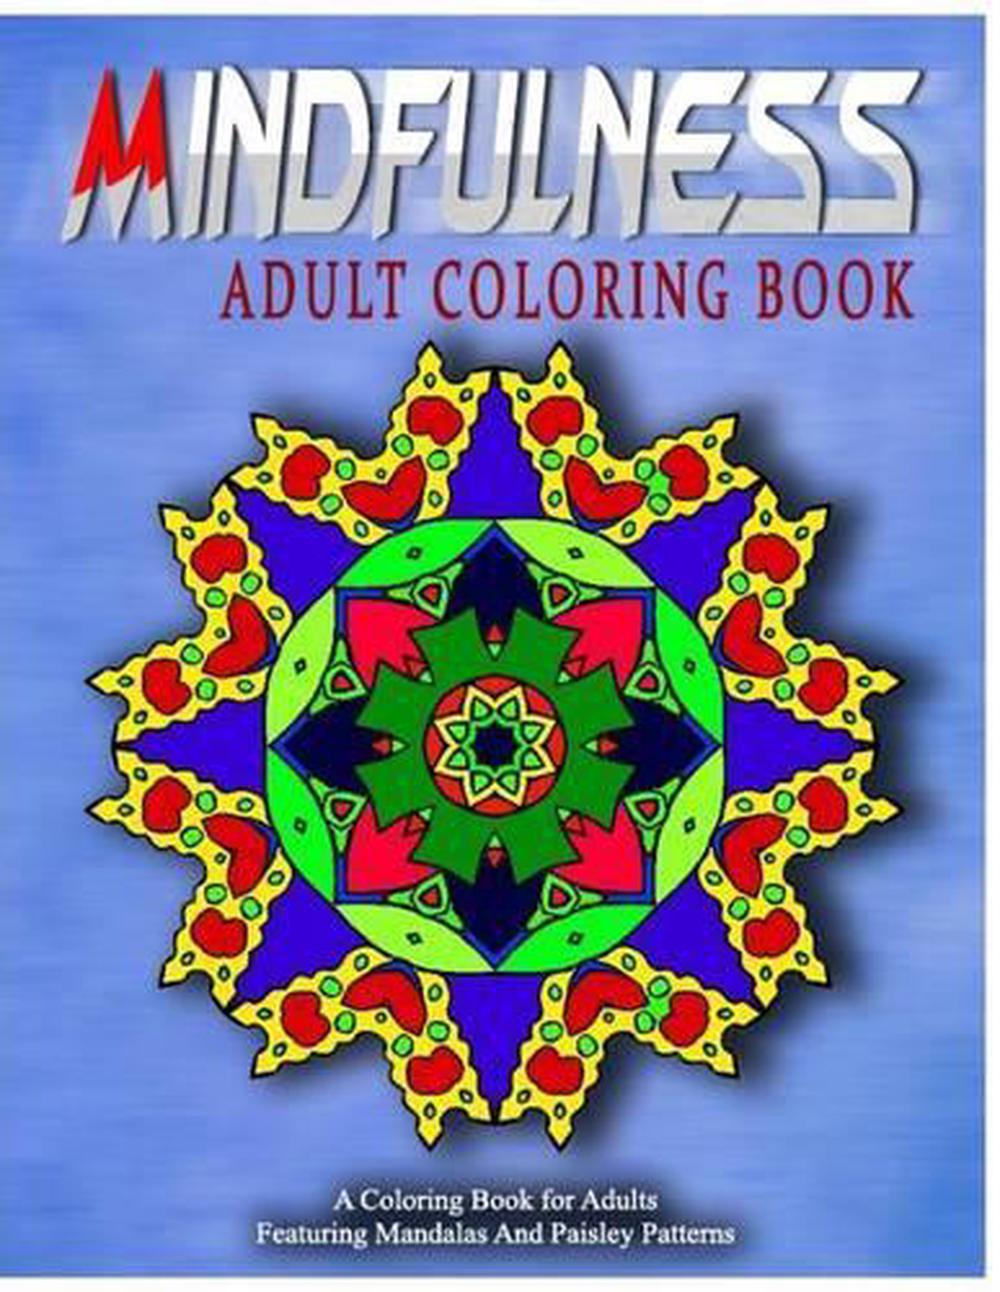 Download Mindfulness Adult Coloring Book, Volume 11: Women Coloring Books for Adults by J 9781519530745 ...